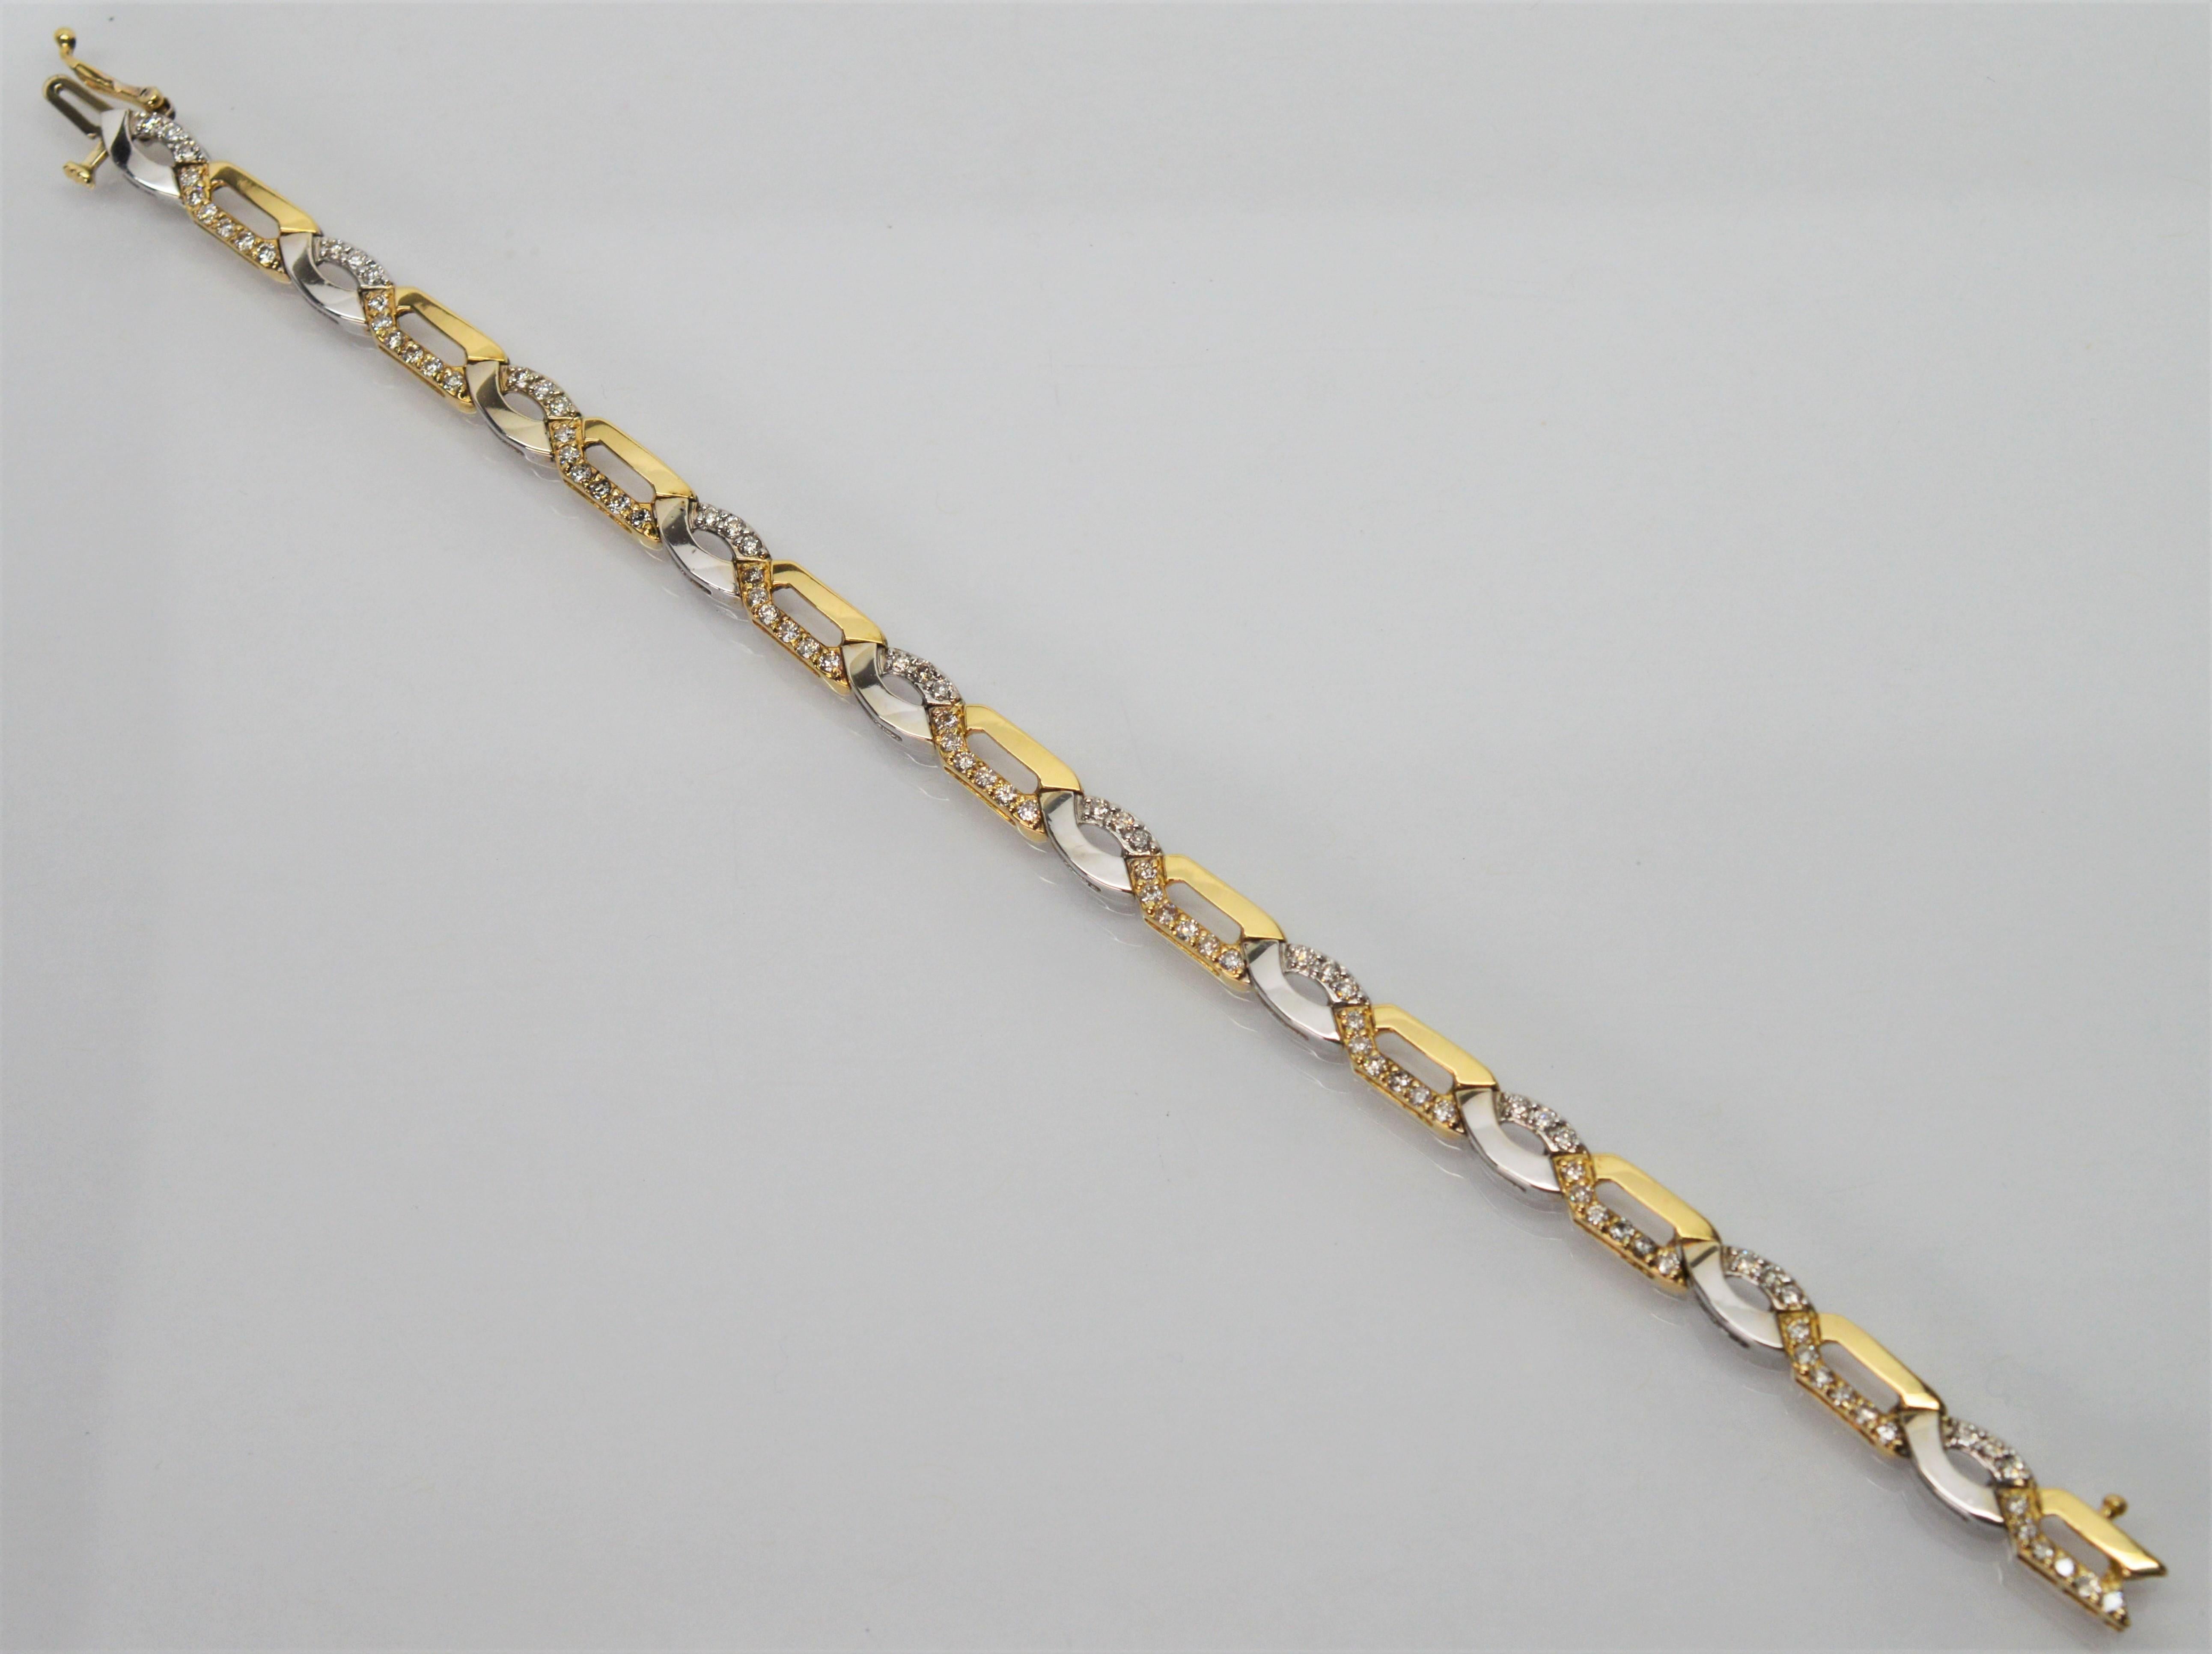 Slender links of intertwined fourteen karat yellow and white gold with diamond accents gently float over the wrist. This versatile and contemporary seven inch bracelet with links at just under 1/4 inch wide has a fresh, light look and will dress up